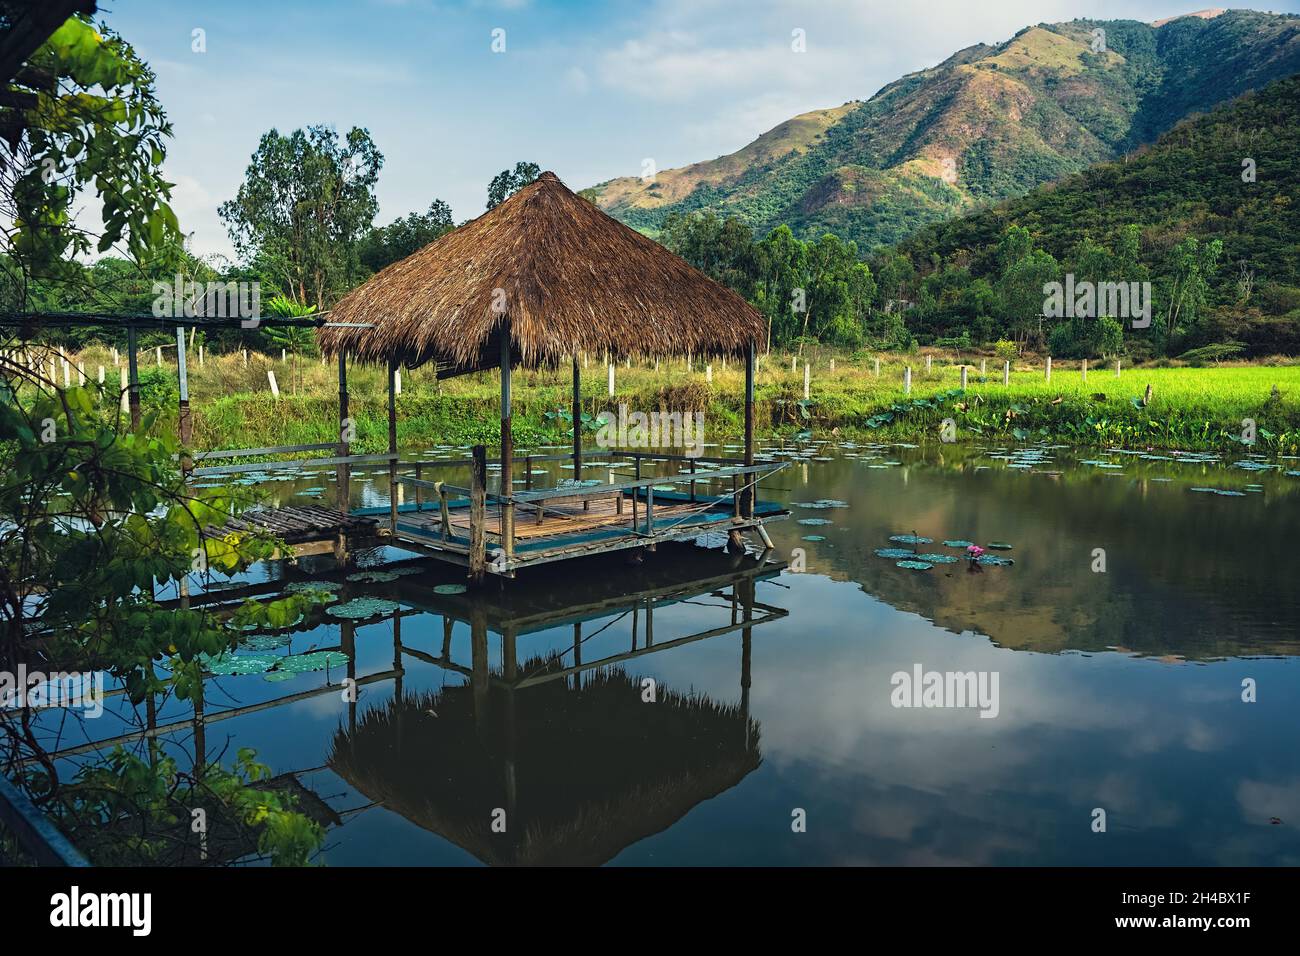 Summer country landscape with gazebo on the small lake among the forest and mountains. Vietnam, Nha Trang Stock Photo